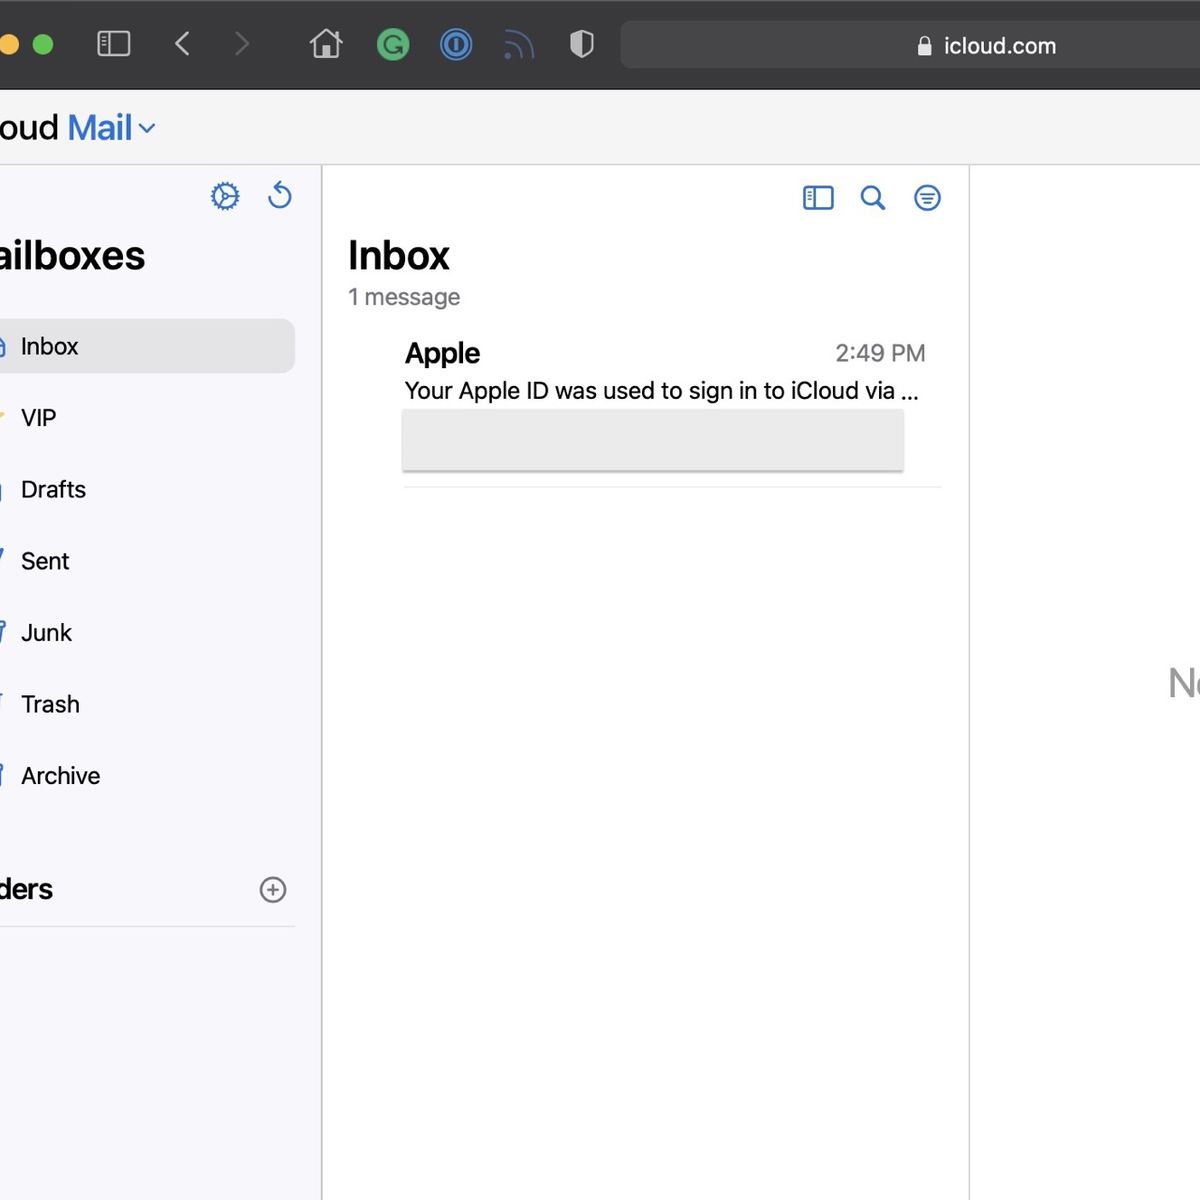 Apple updates Mail on iCloud.com with new design, Hide My Email